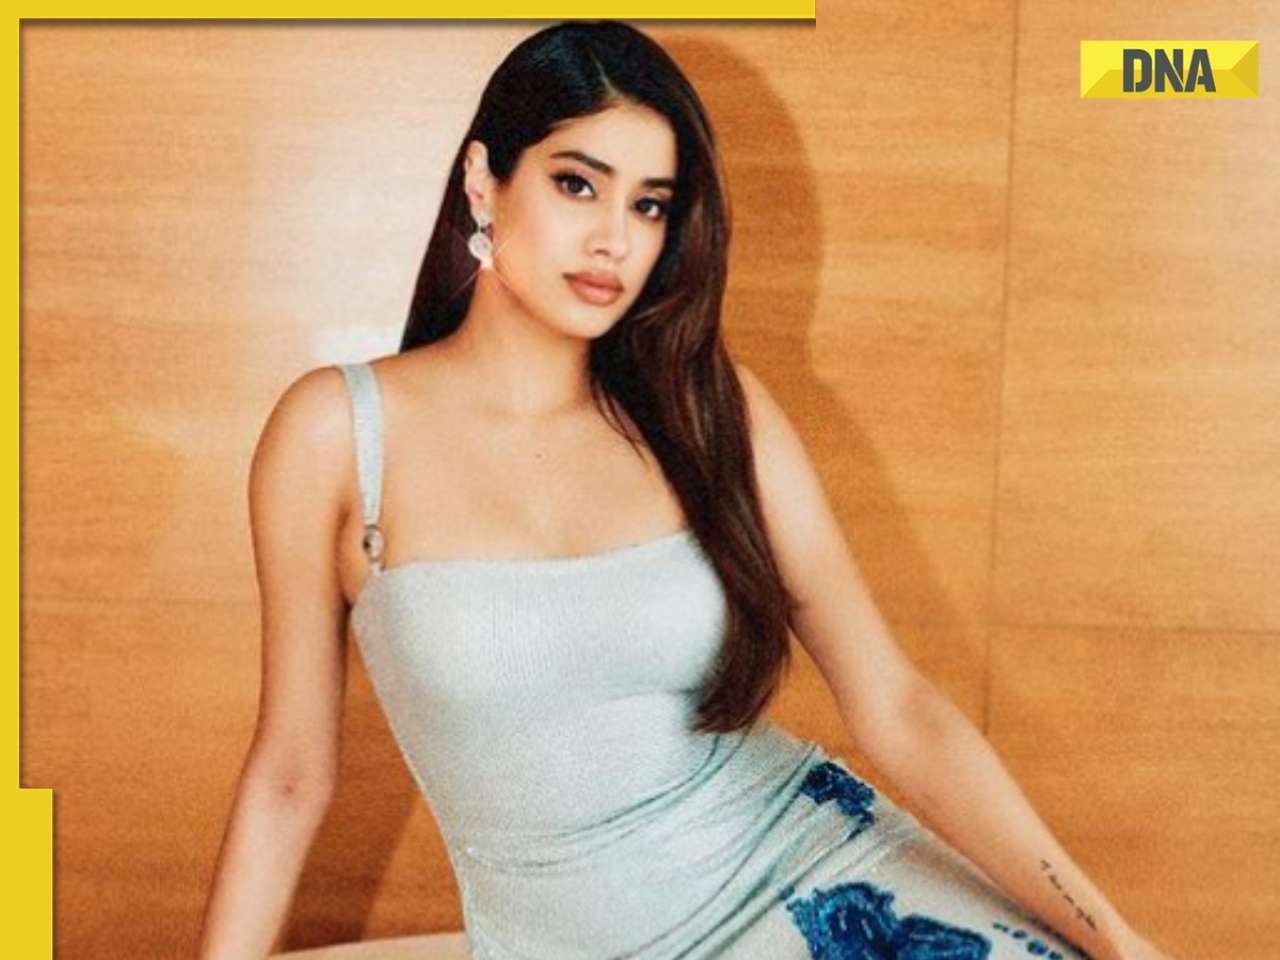 Janhvi Kapoor says she felt sexualised by media at the age of 12-13: 'There is a sort of character assassination...'